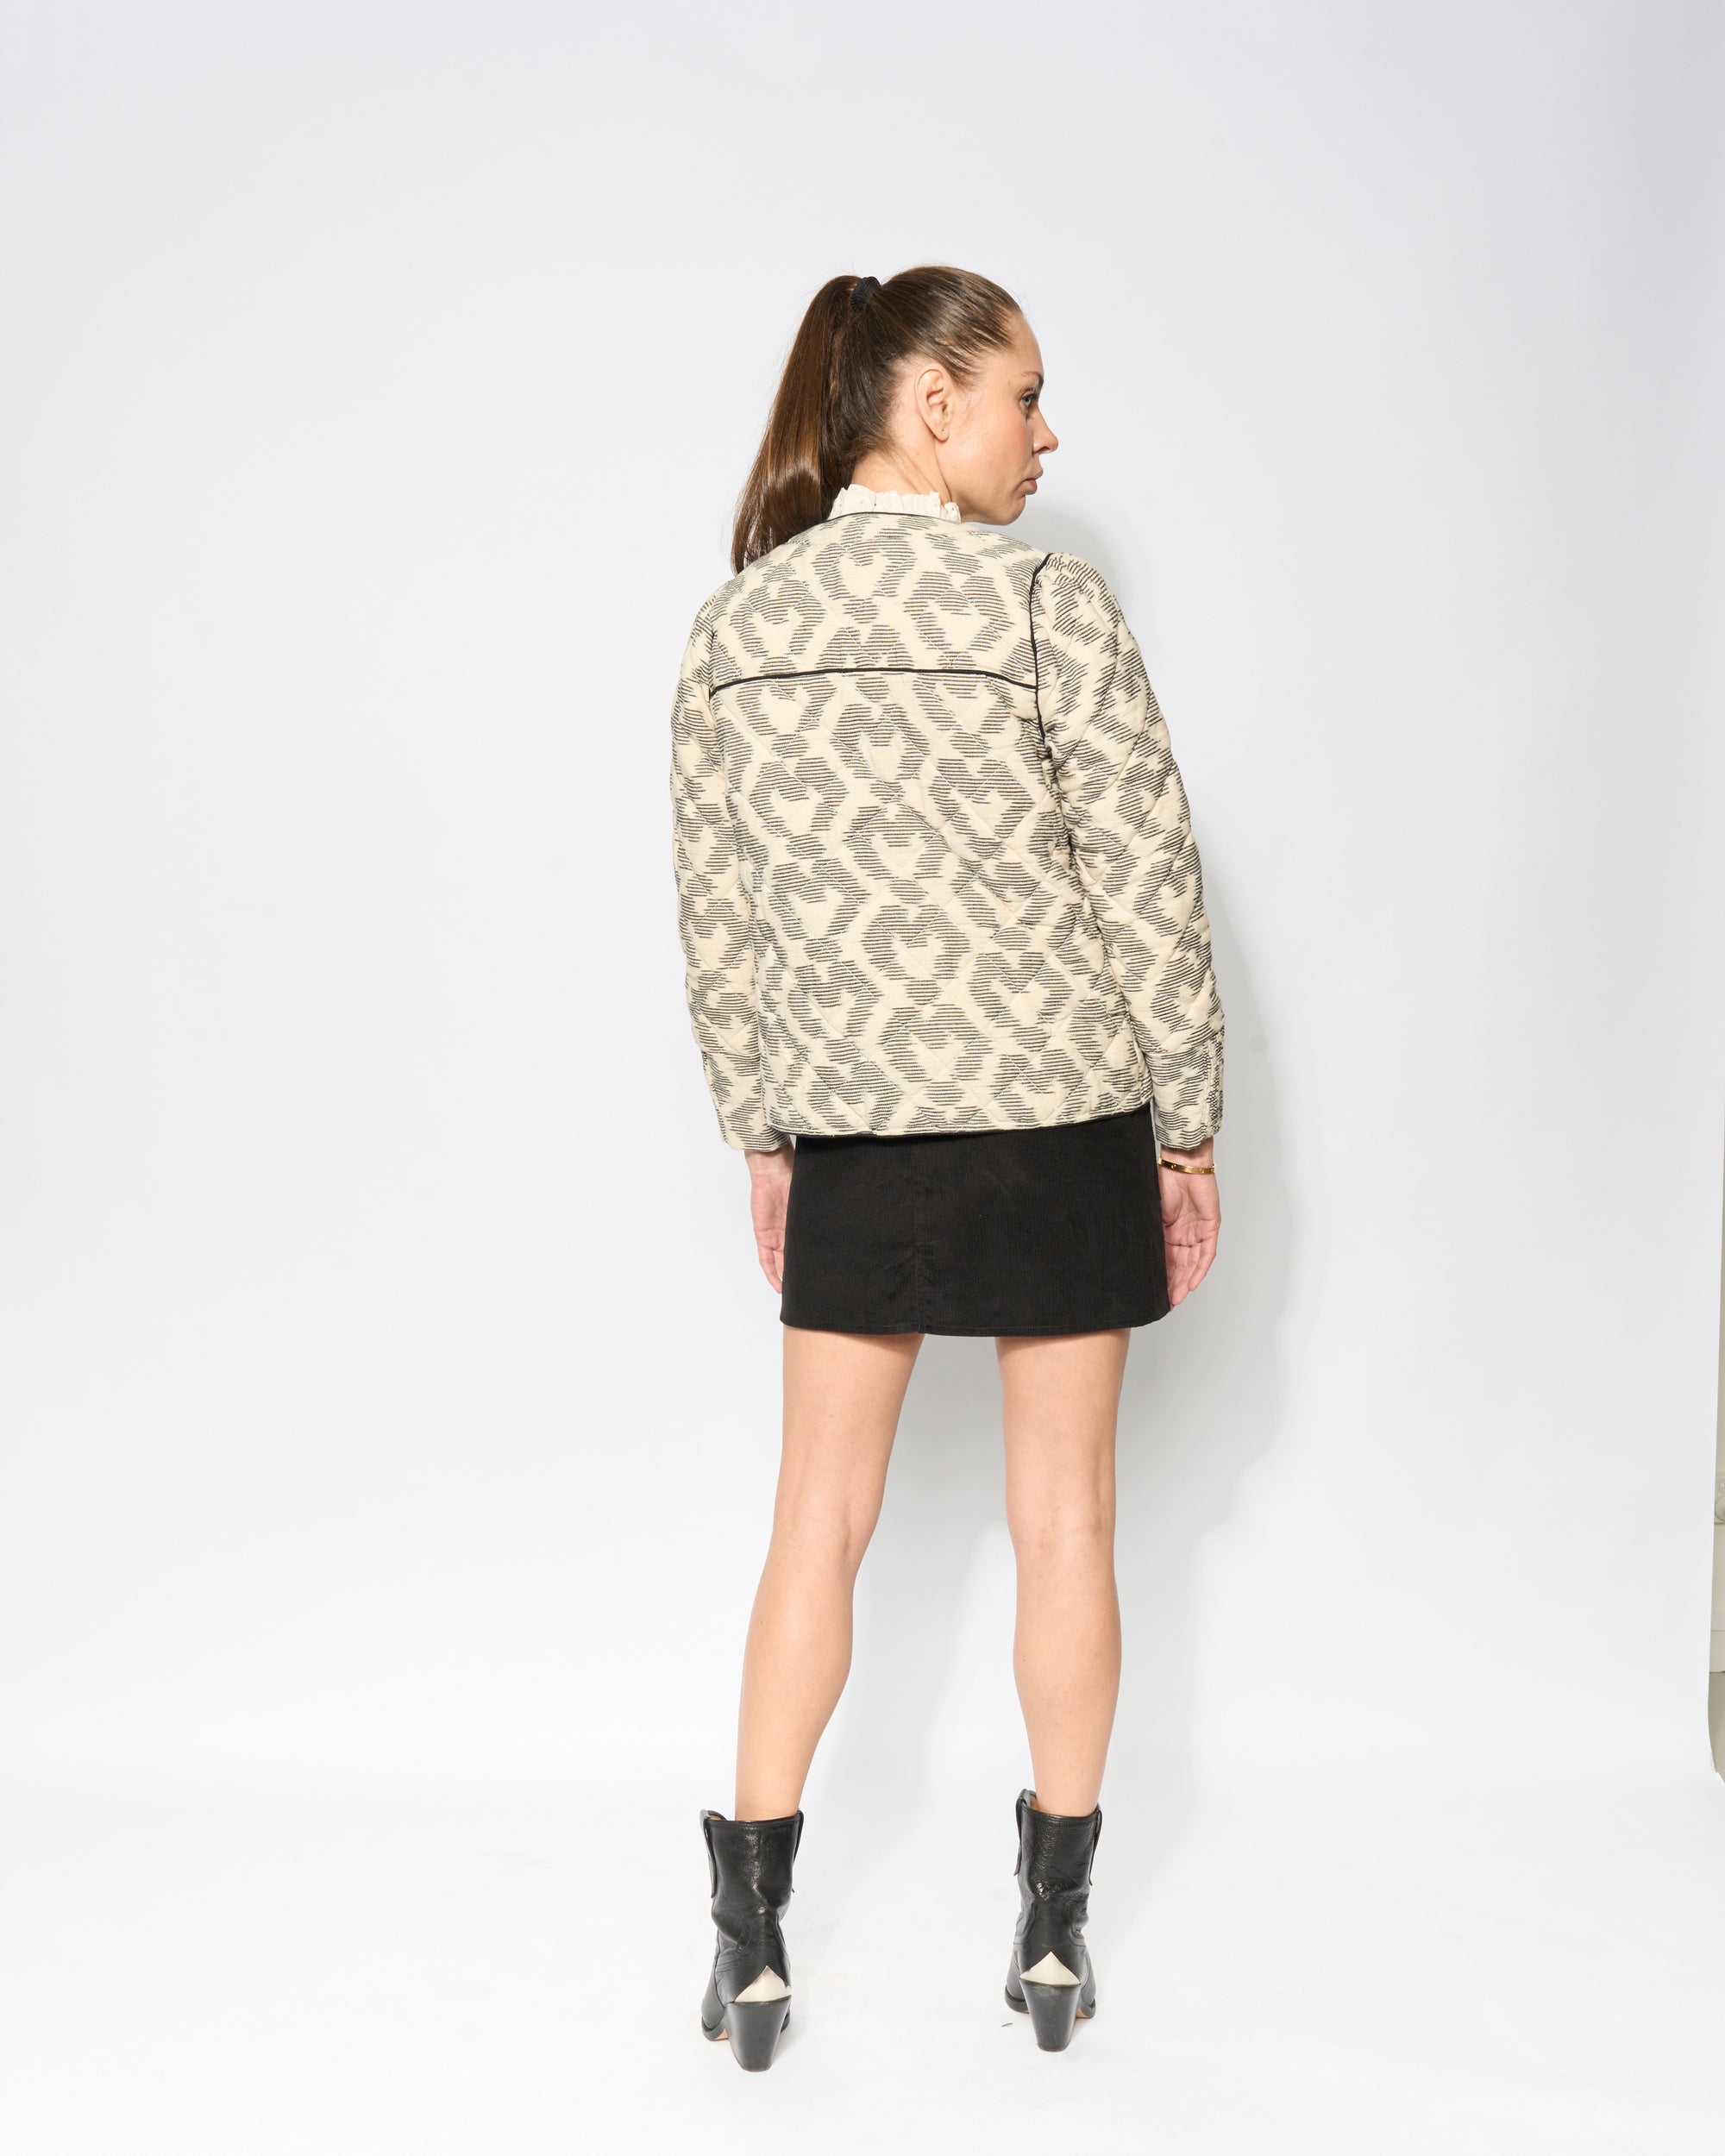 IKATE Quilted Jacket